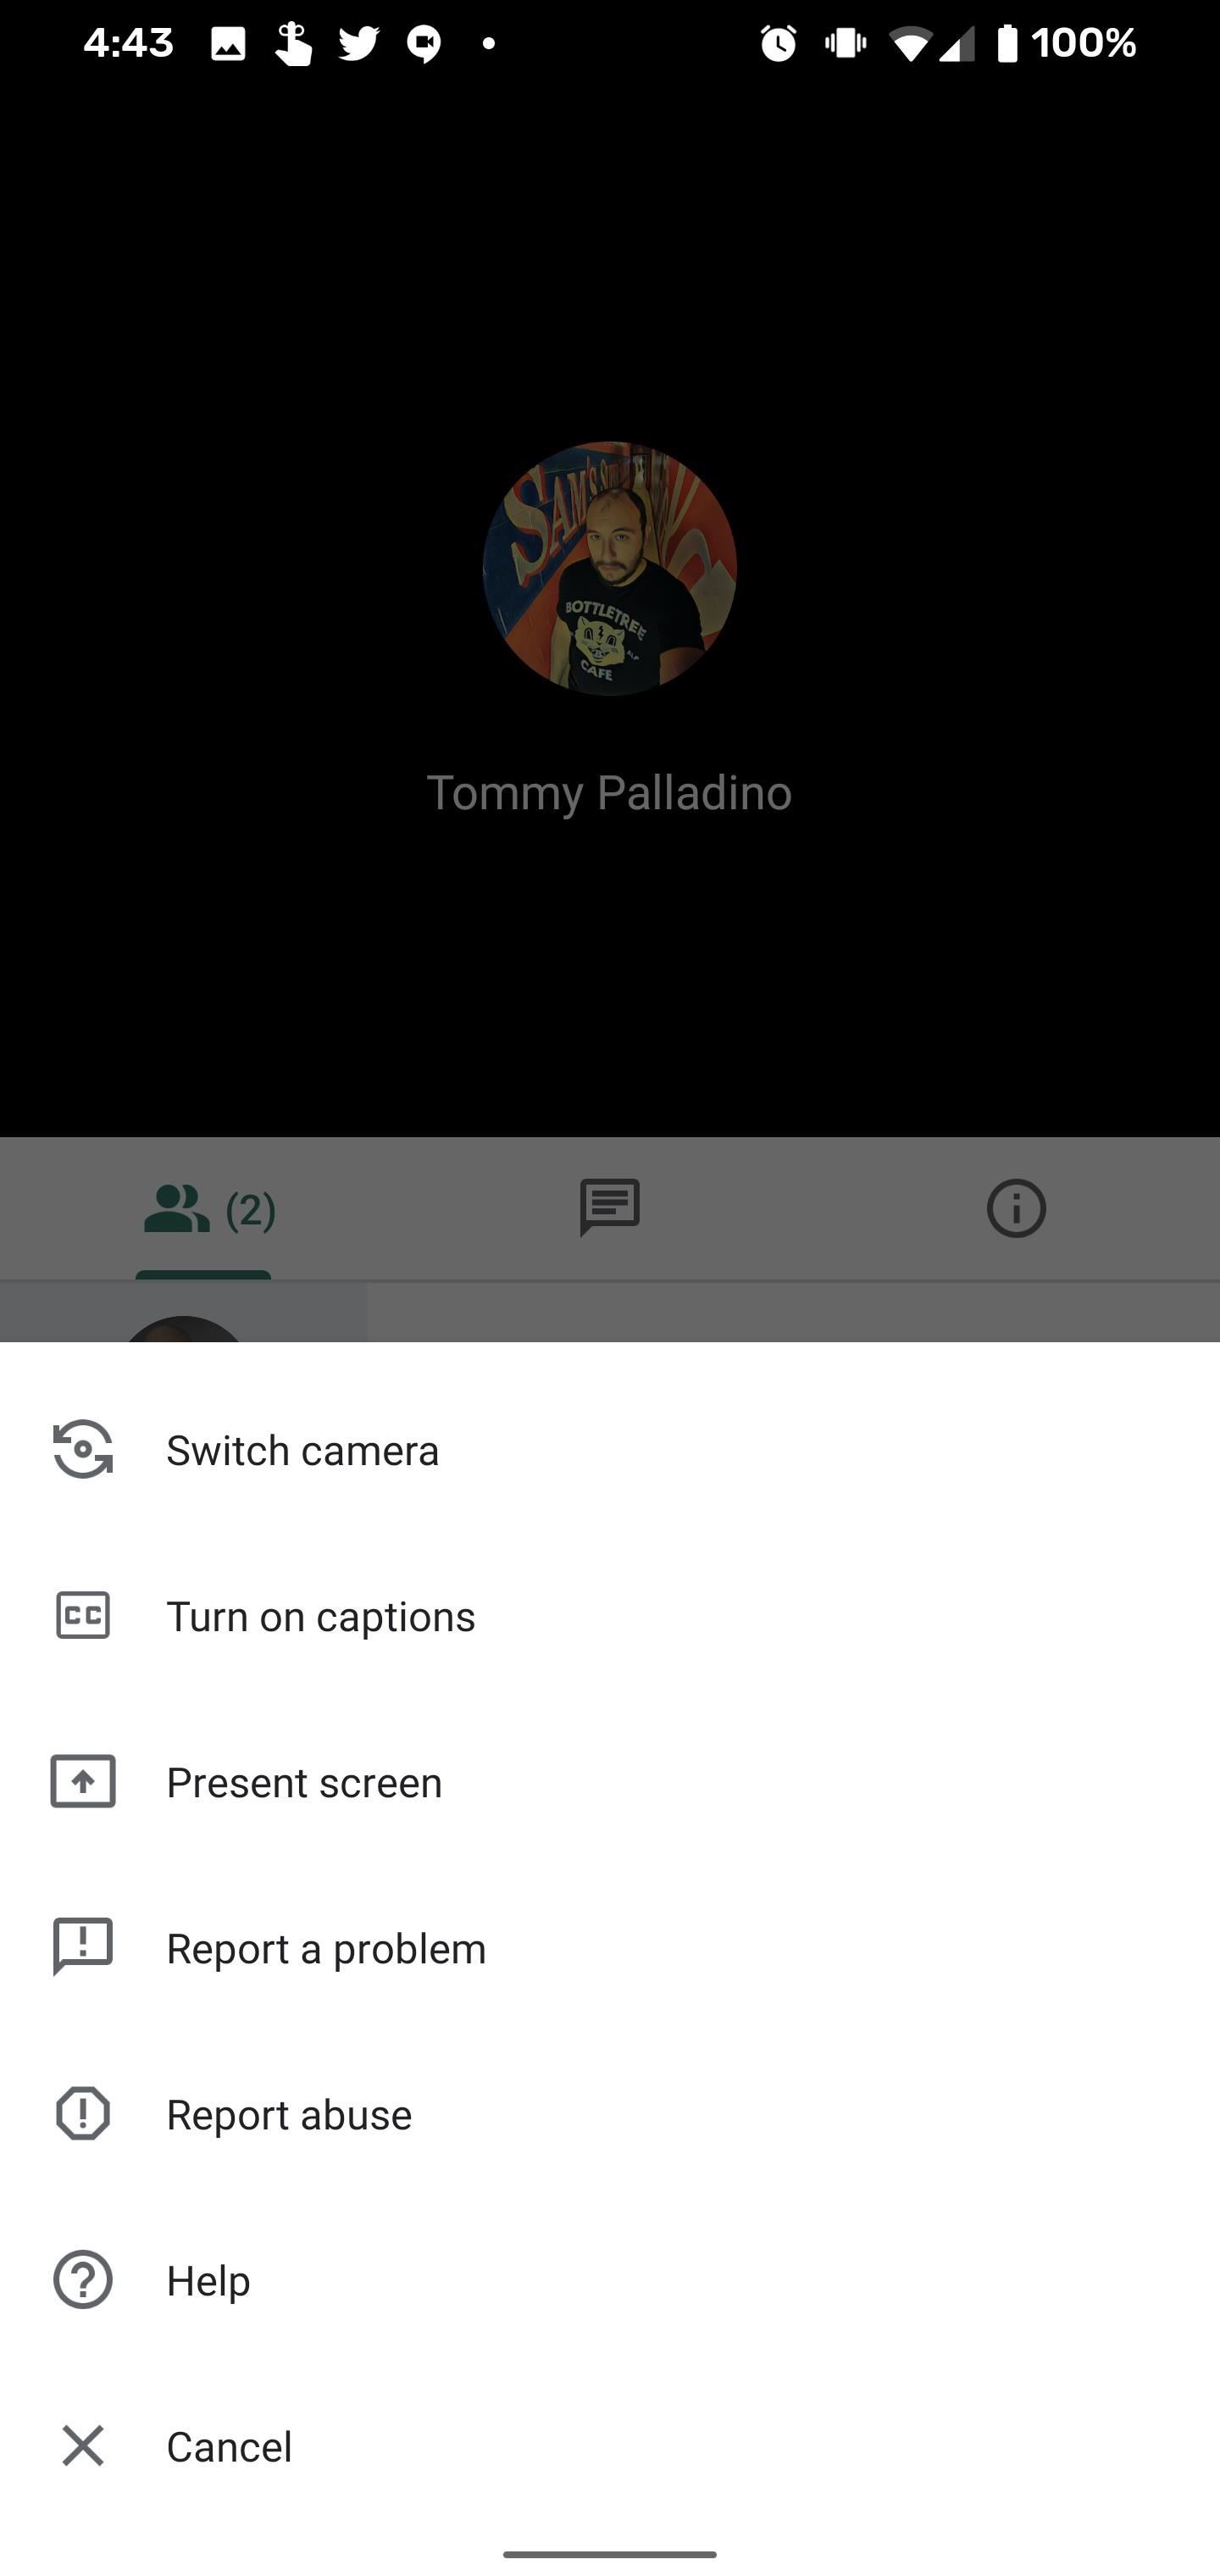 How to Share Your Smartphone's Screen in Google Meet